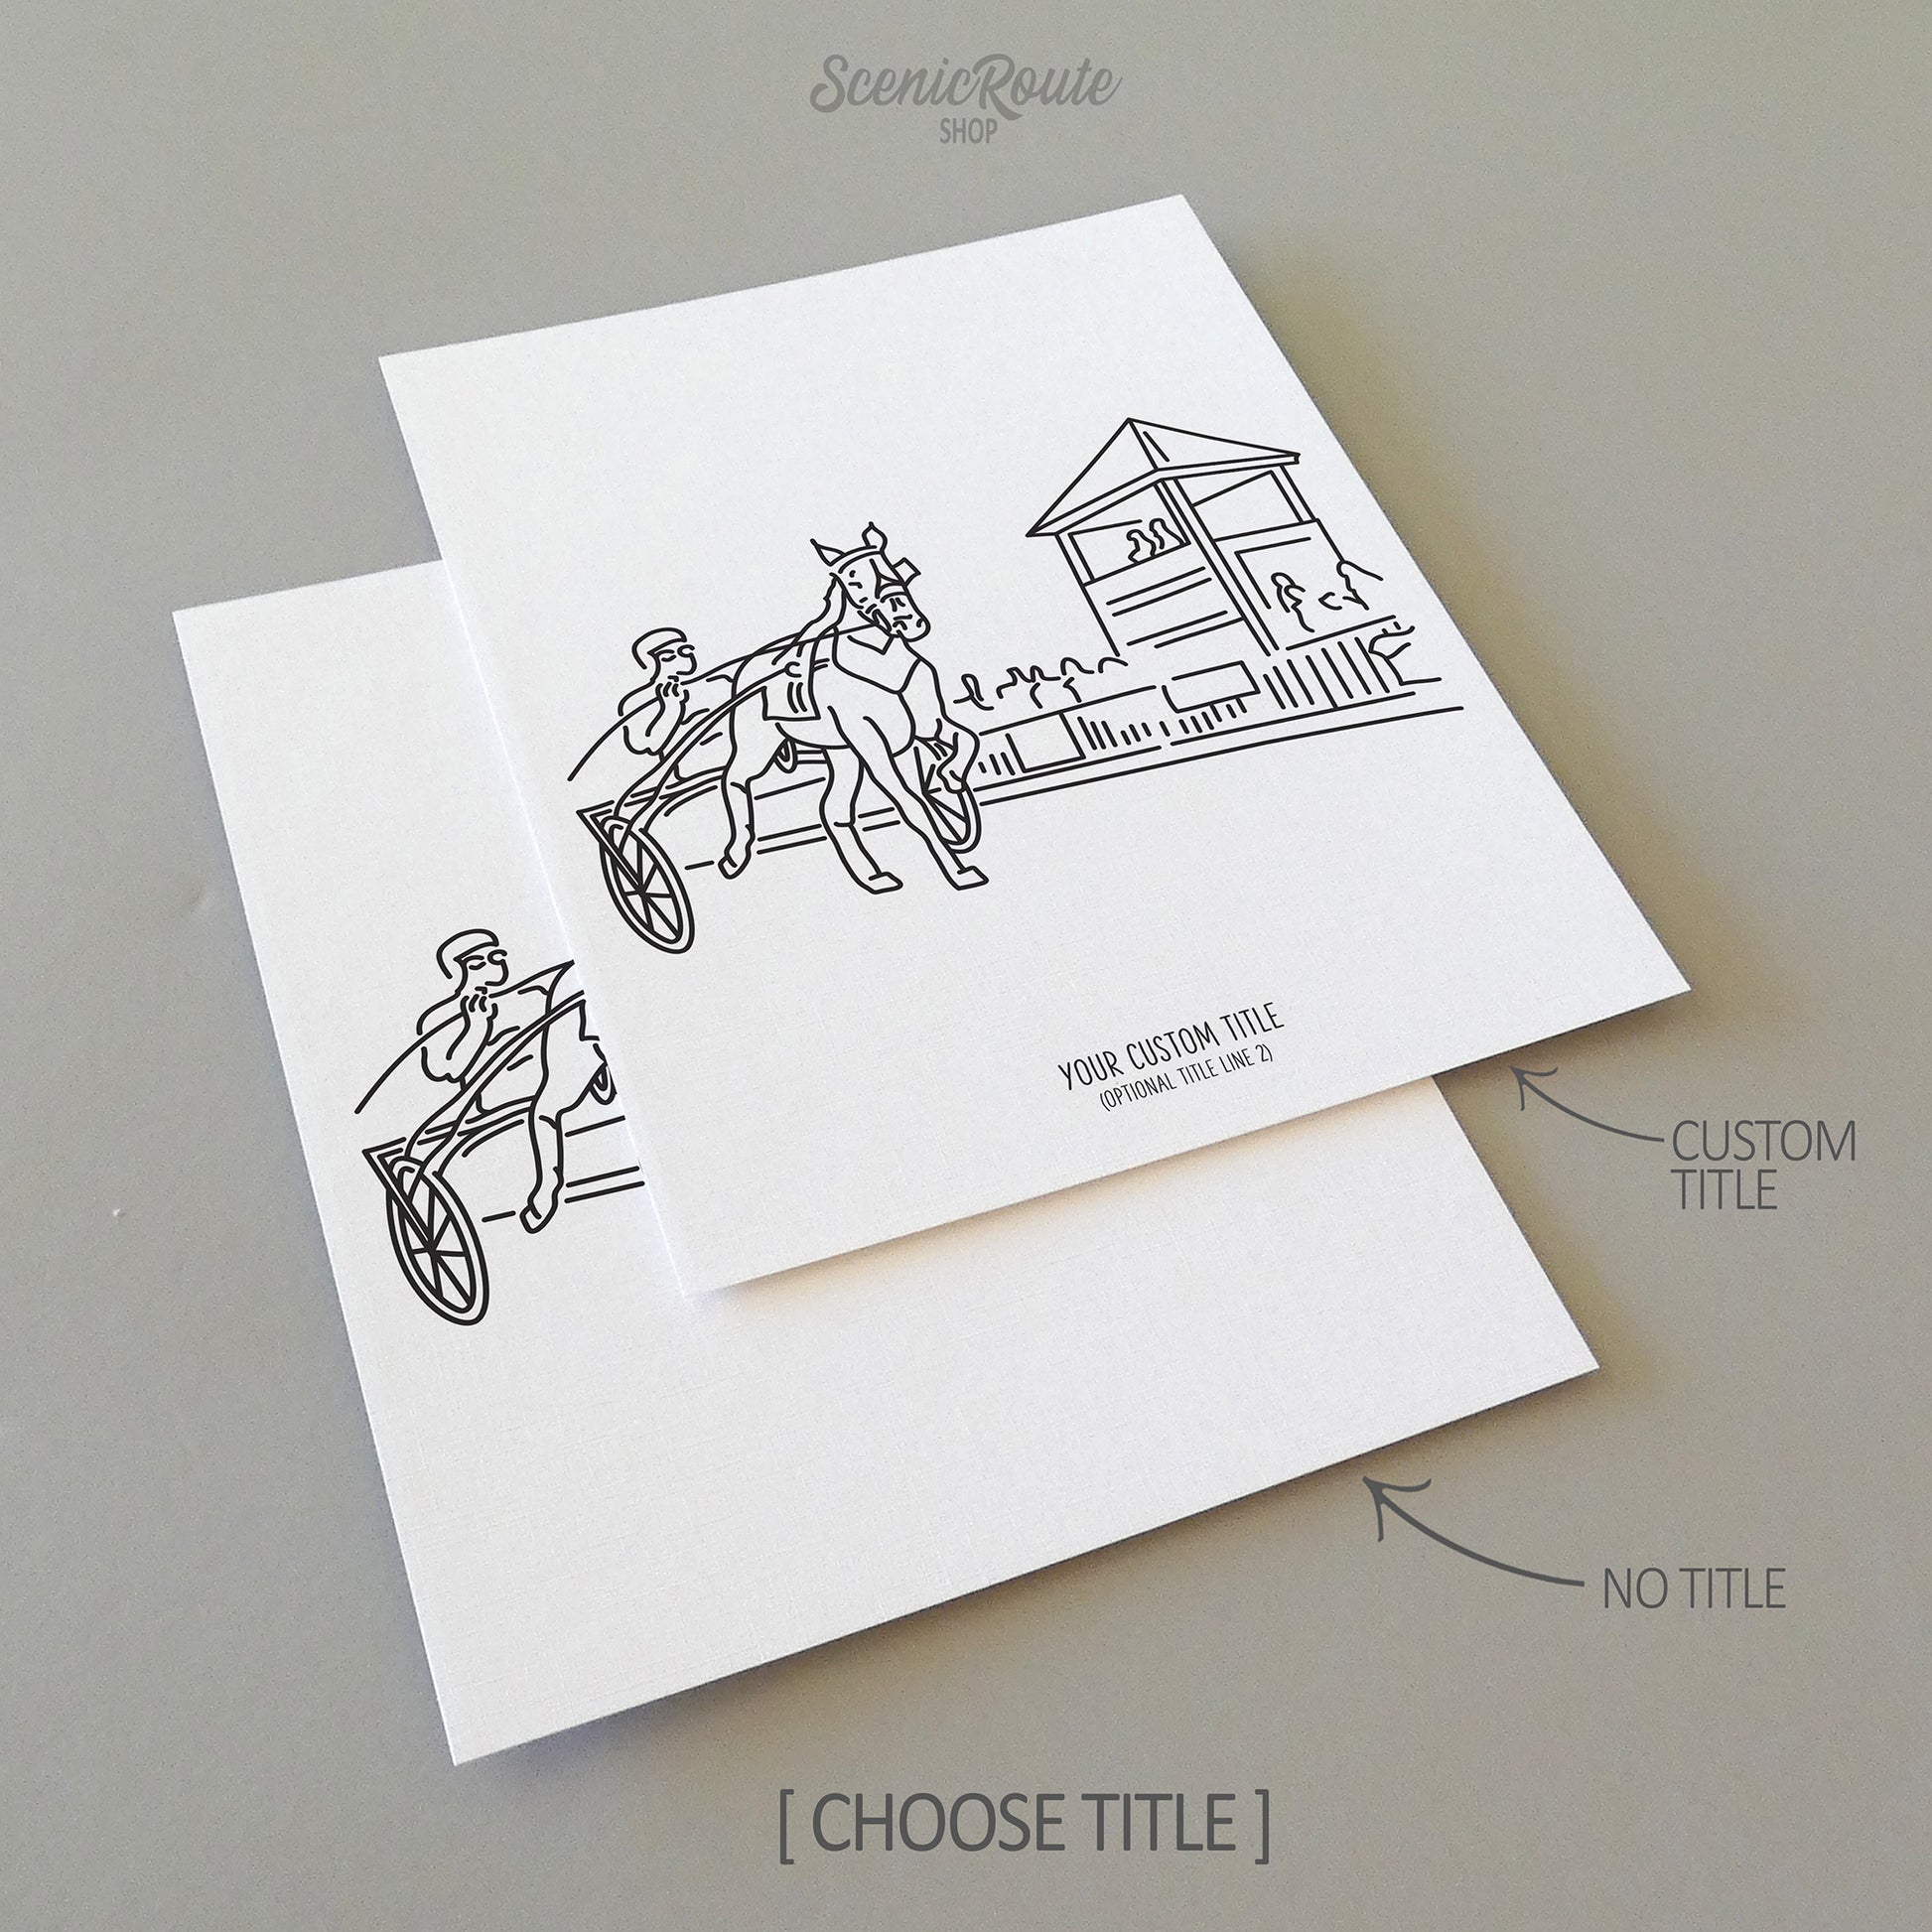 Two line art drawings of harness racing on white linen paper with a gray background.  The pieces are shown with “No Title” and “Custom Title” options for the available art print options.